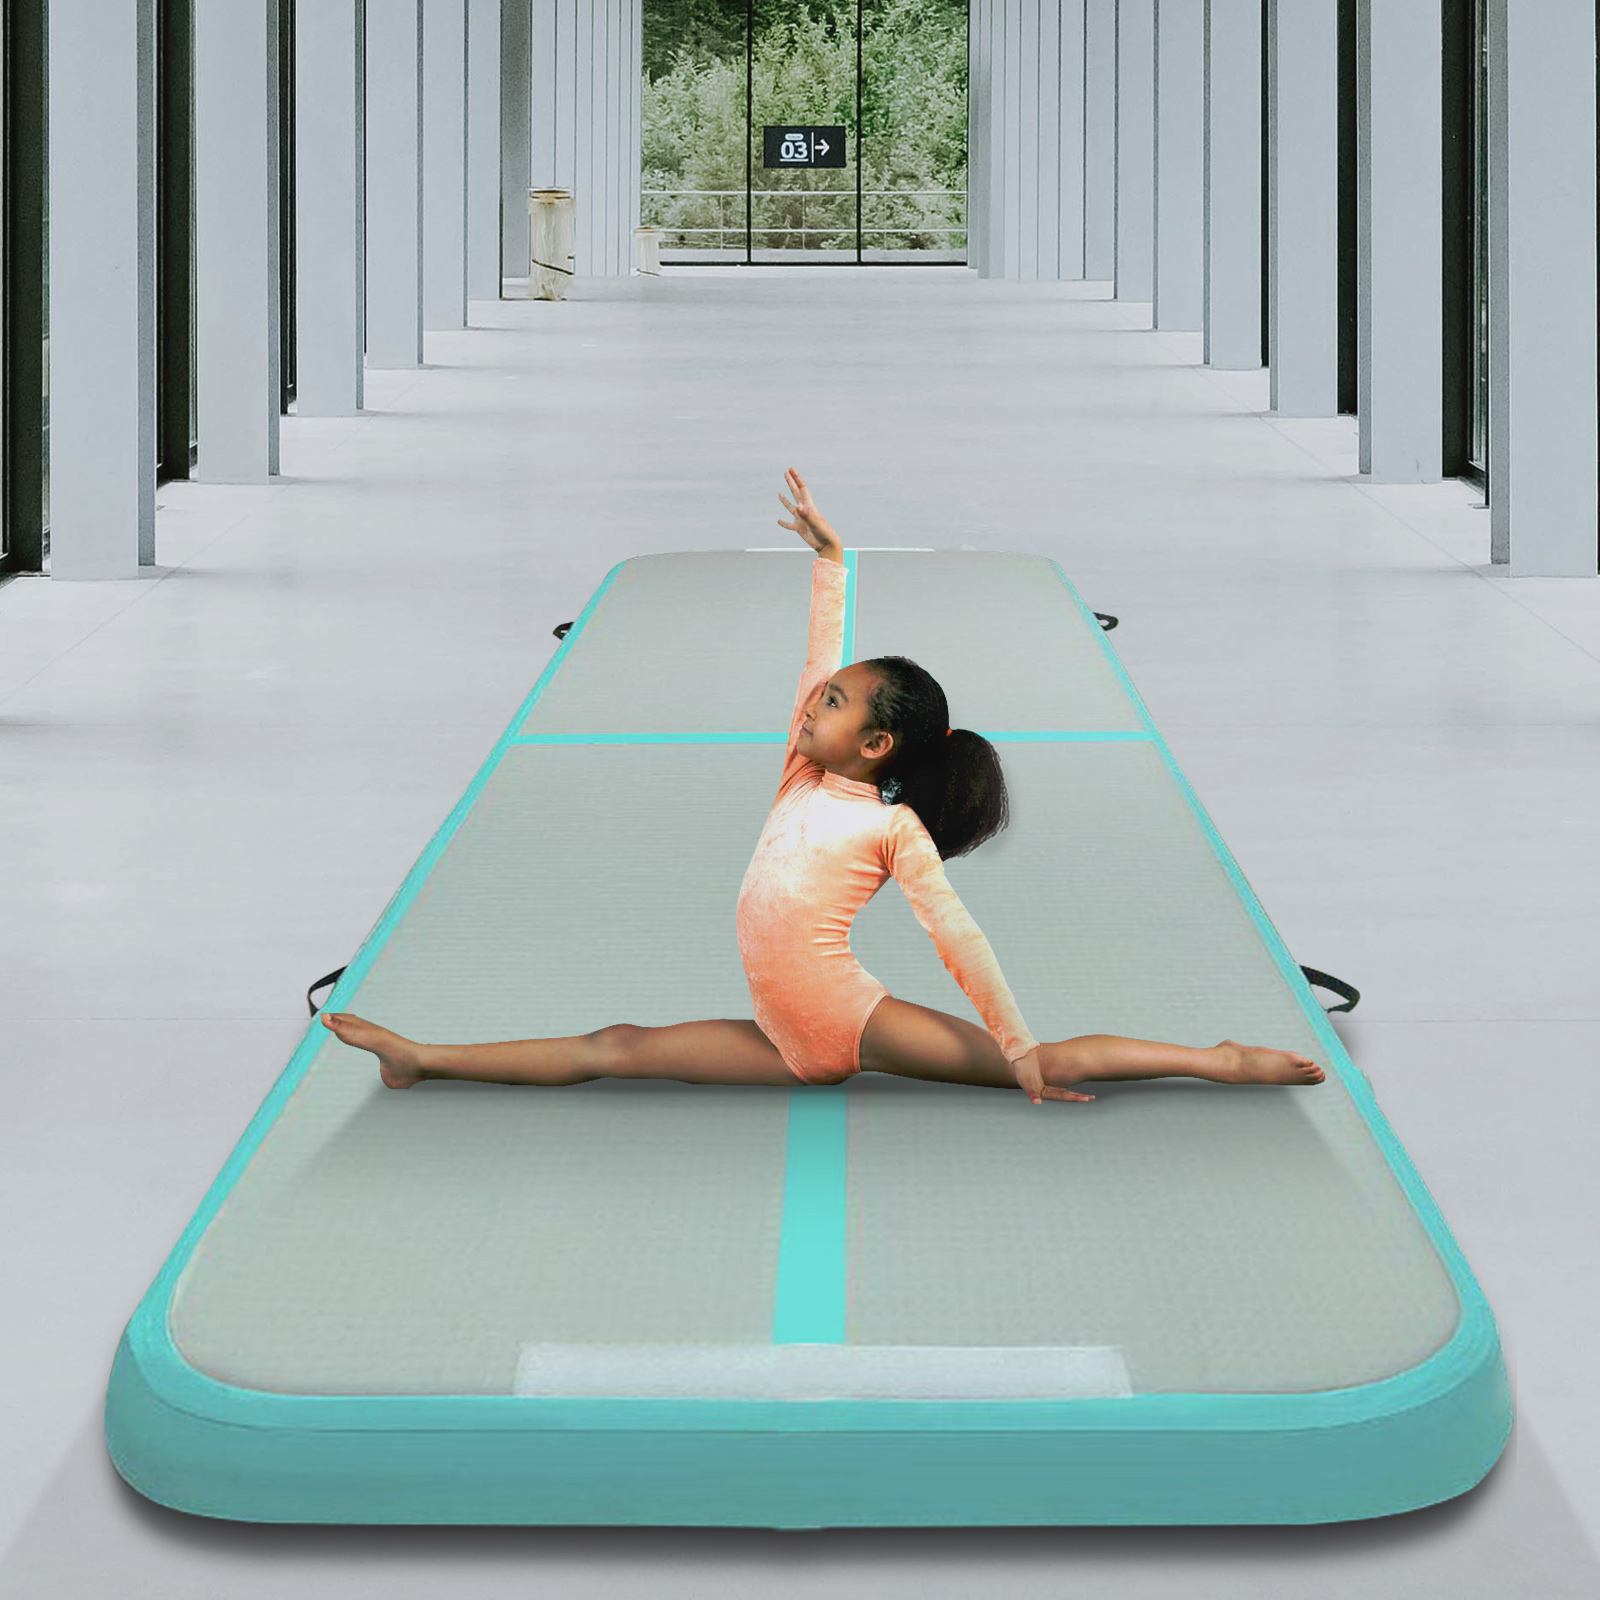 Gymnastic Tumbling Inflatable Air Track Mat Green Home Exercise Fitness 5X1M